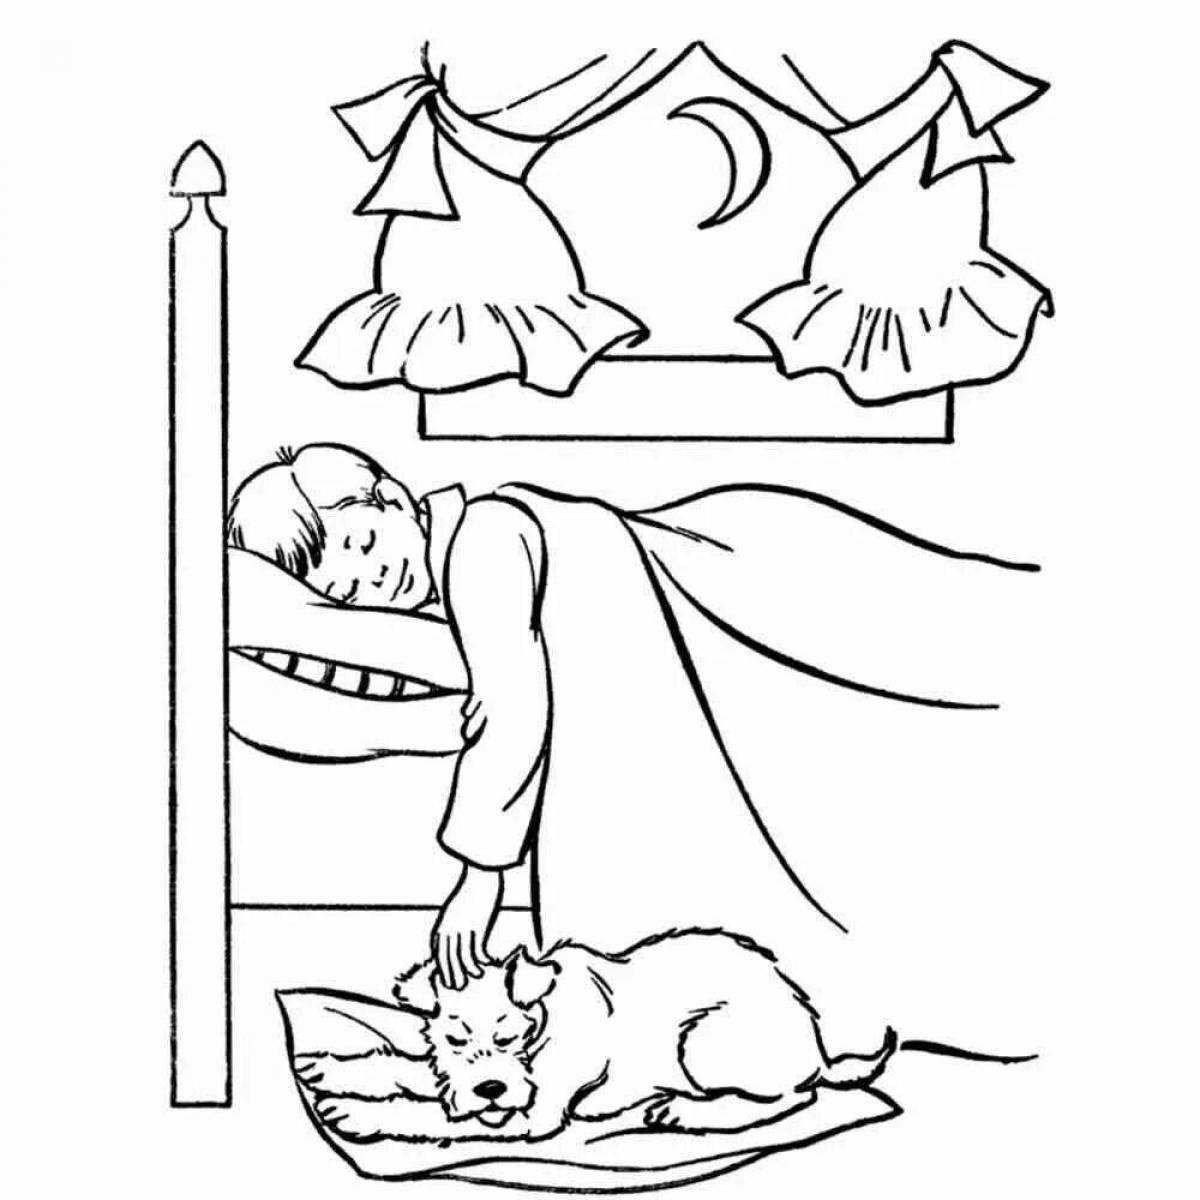 Sweet children sleeping coloring page